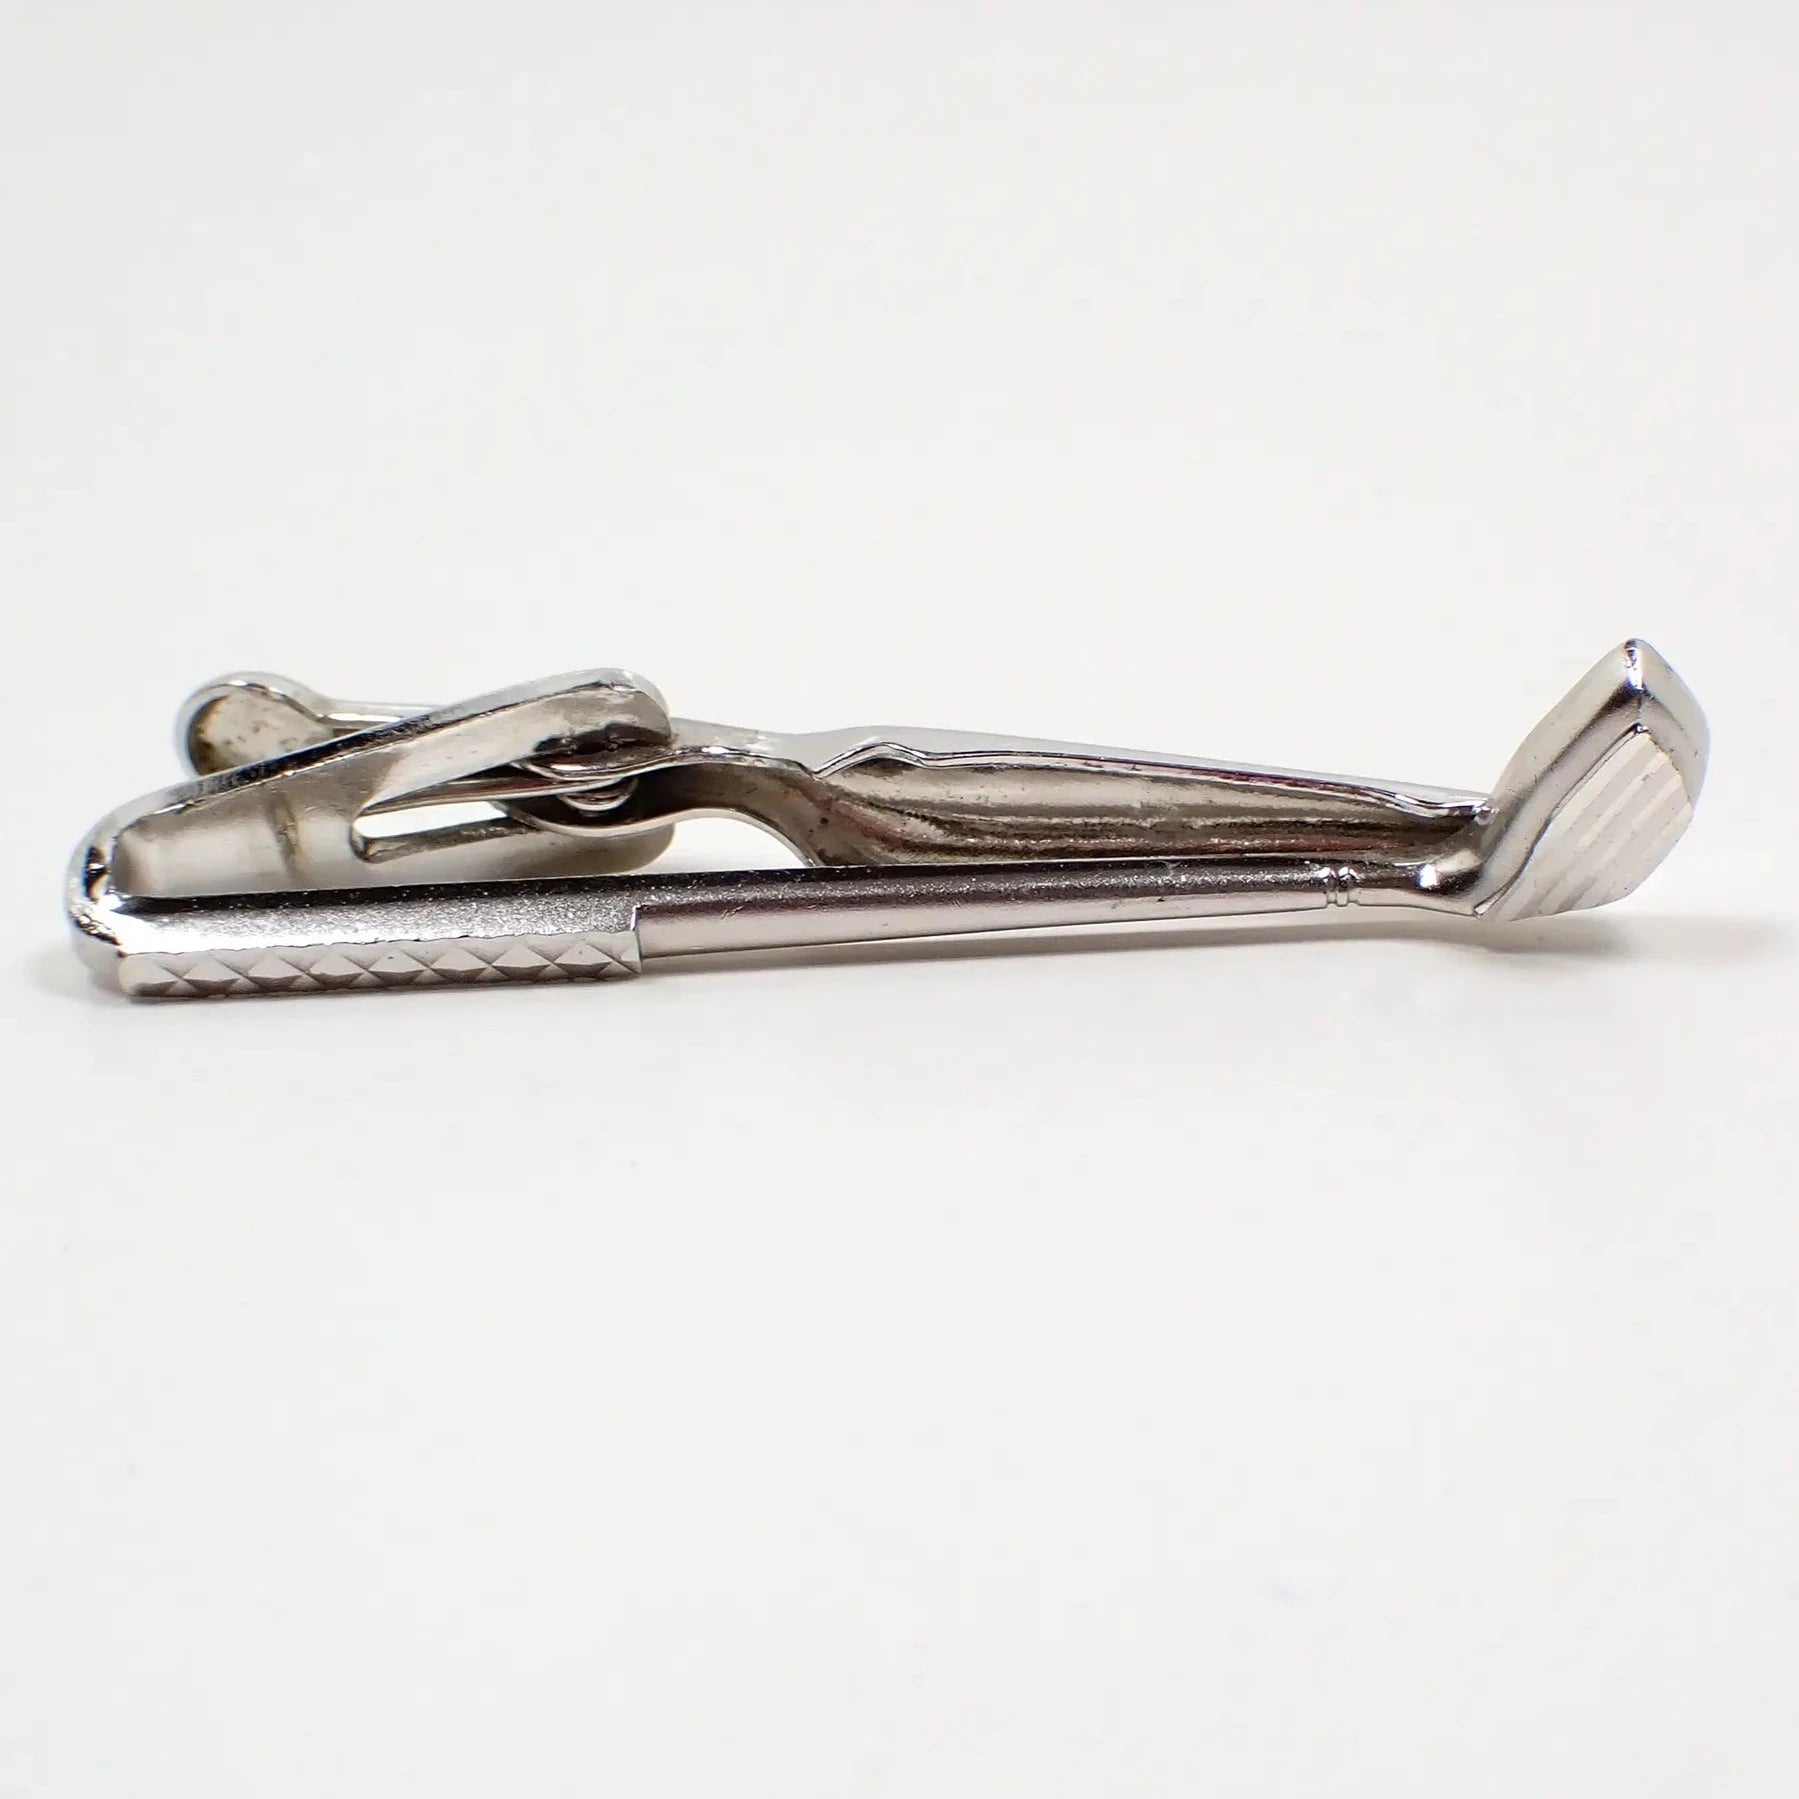 Front view of the retro vintage Swank tie clip. The metal is silver tone in color. It's shaped like a golf club. The handle and bottom part of the club have a cut etched design that gives it some flash as you move around in the light.